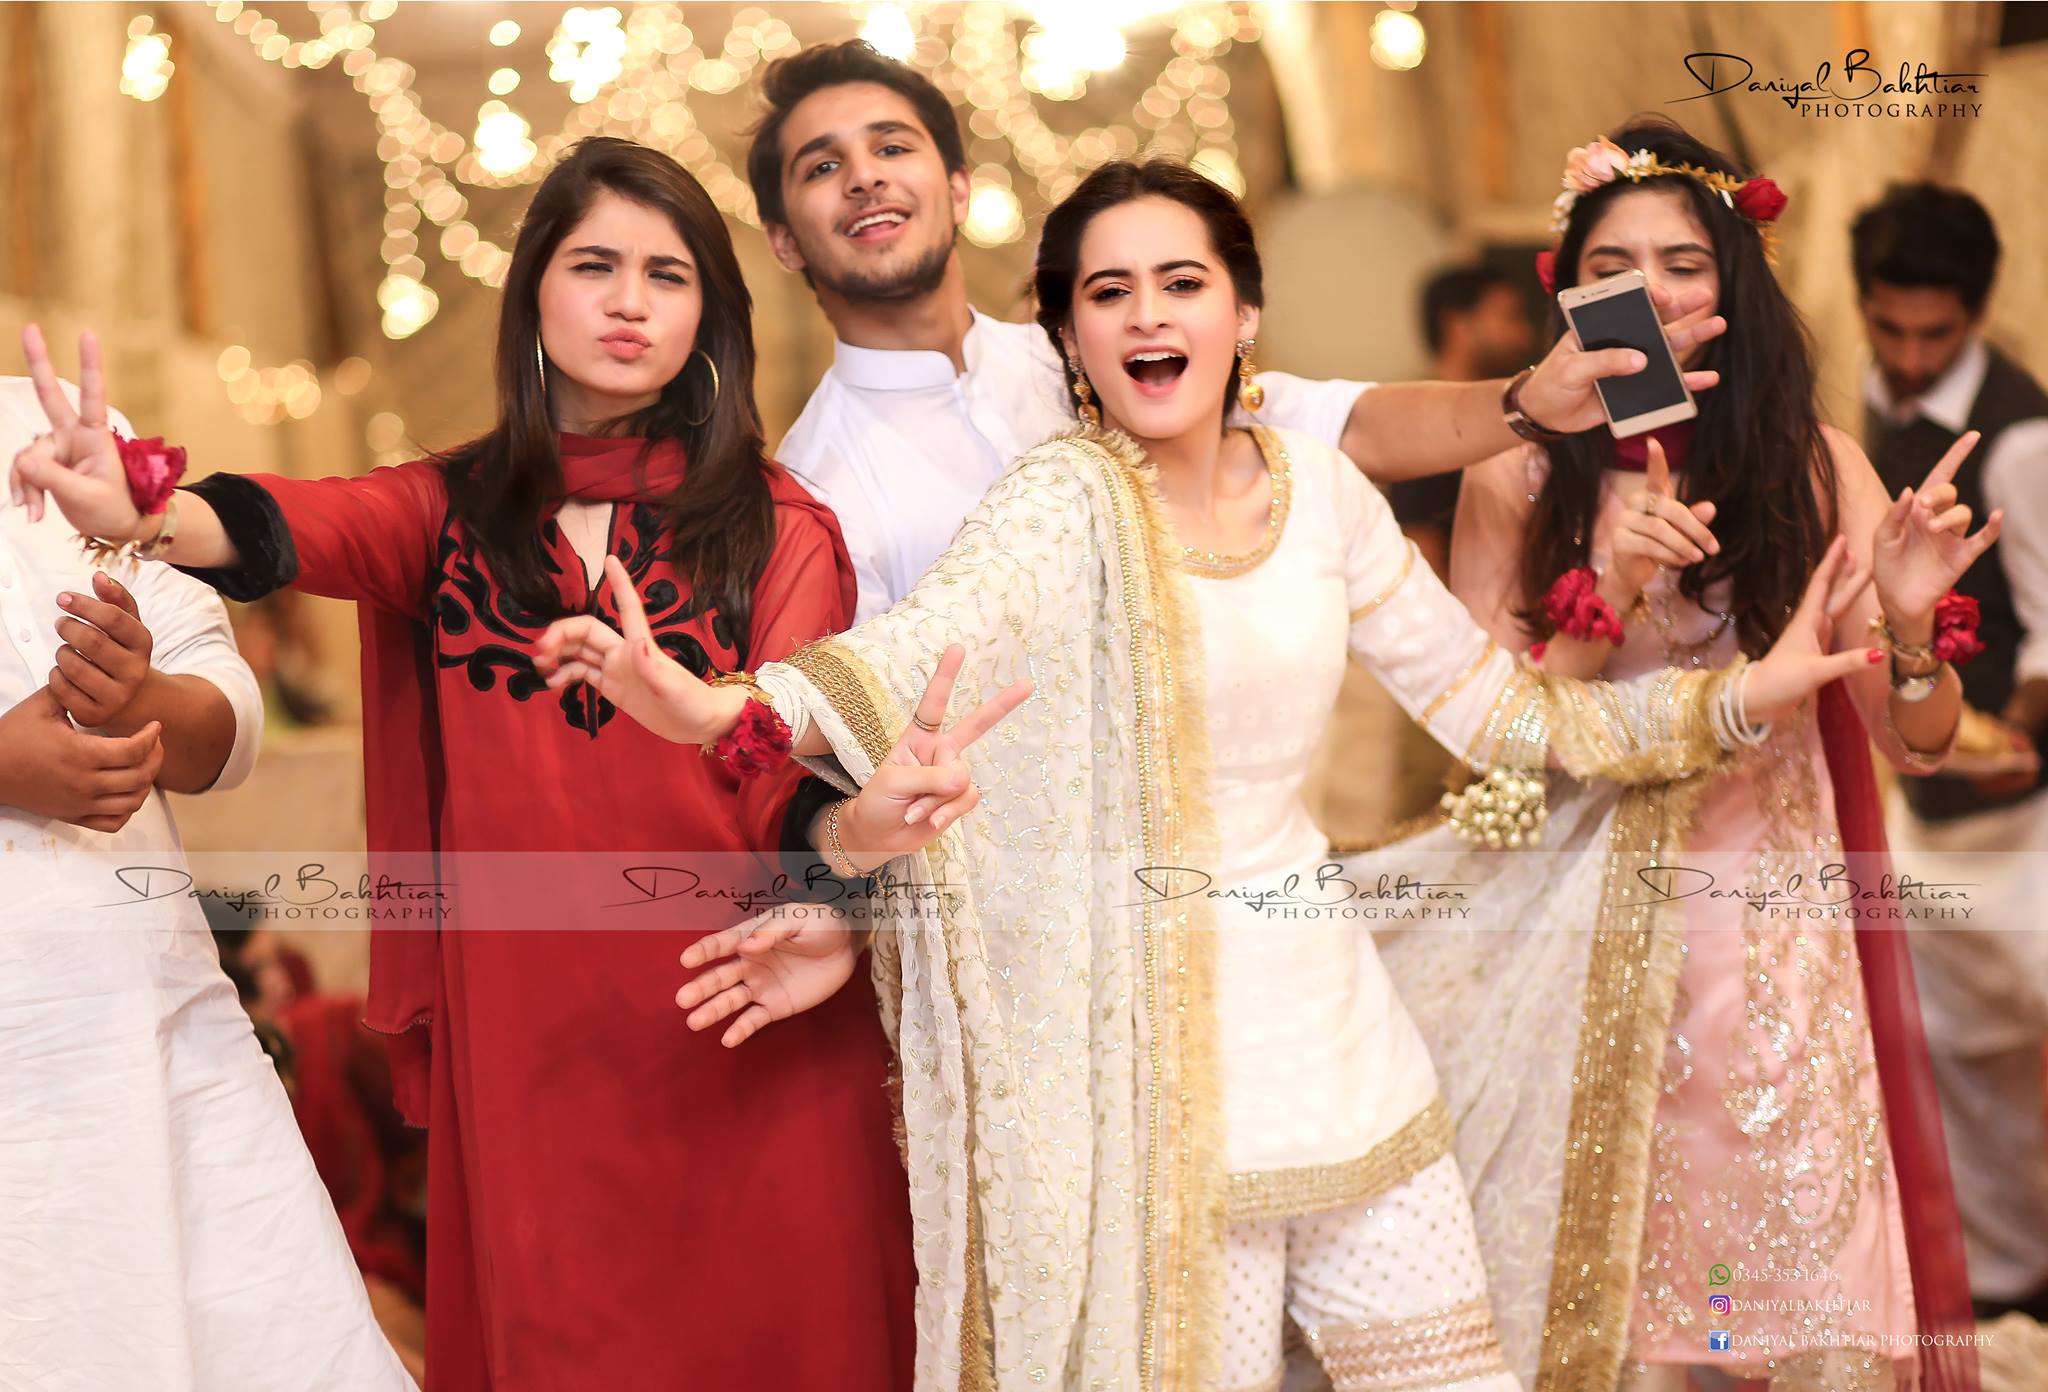 Aiman and Minal Khan Dancing on Dholki Exclusive Video & Pictures